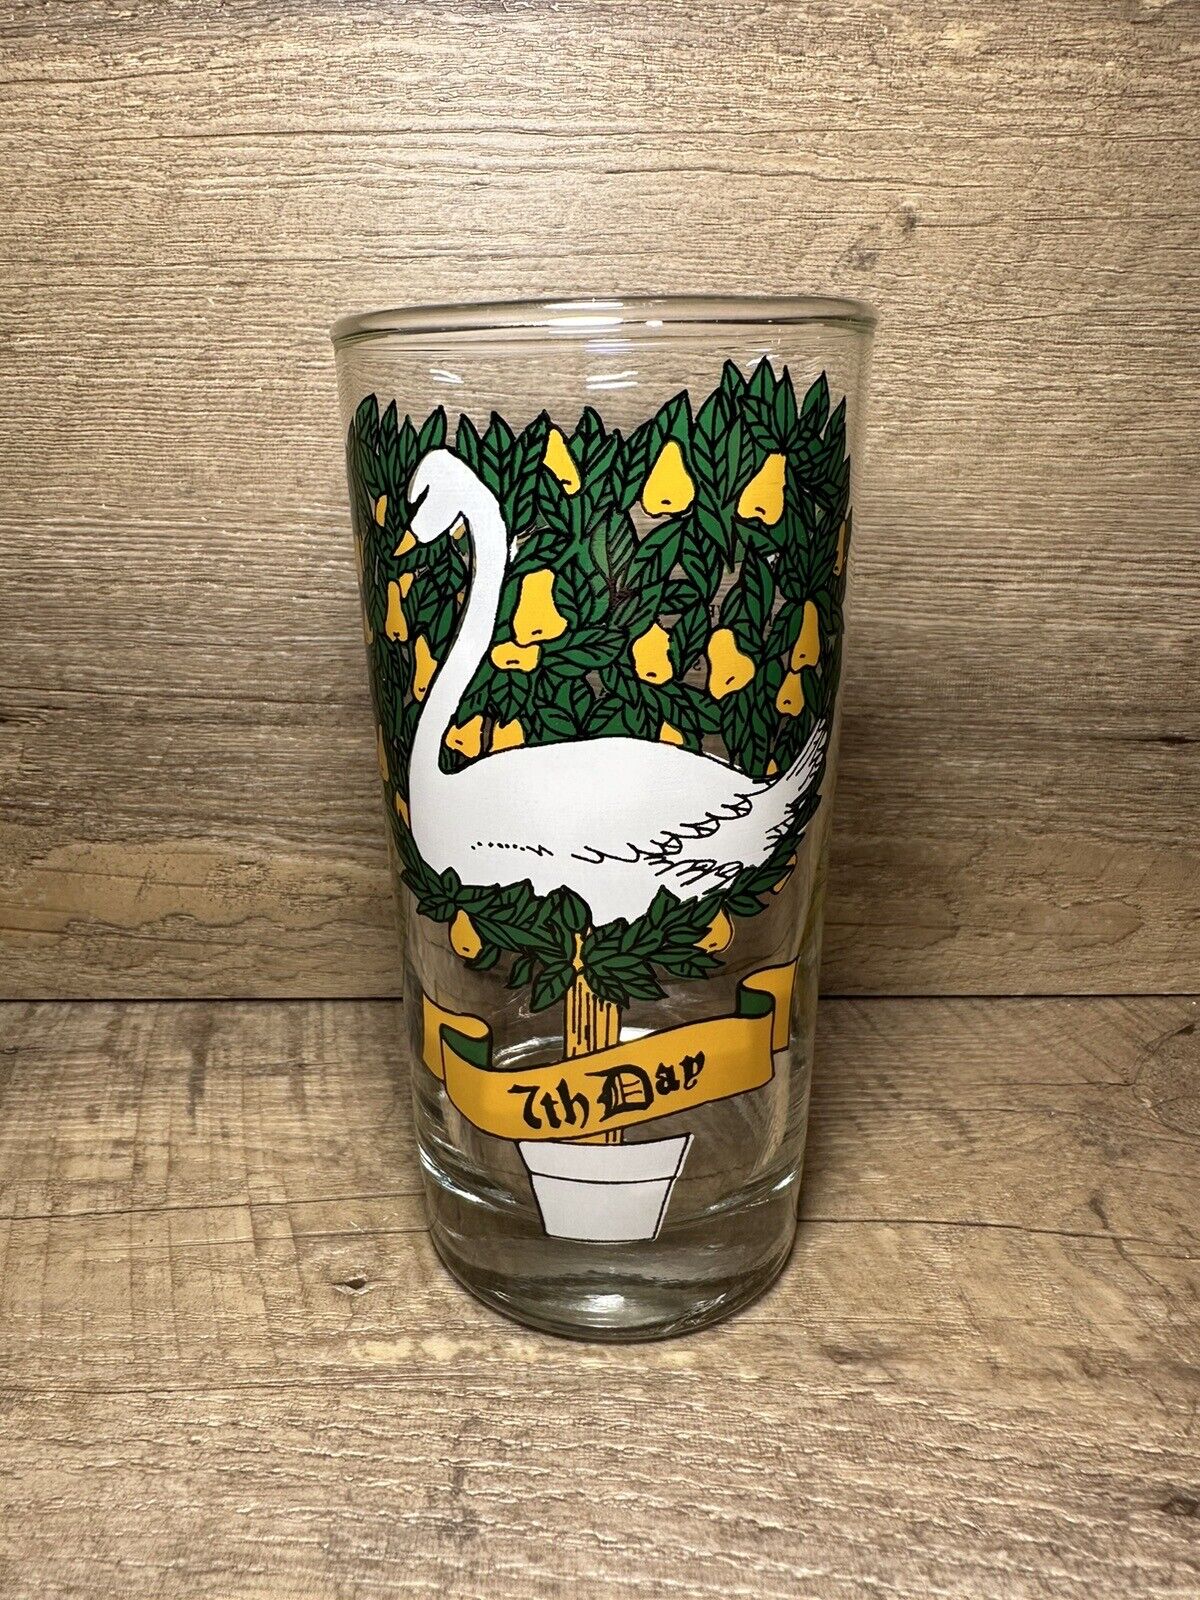 Seventh Day of Christmas Drinking Glass - Vintage White Green Yellow Swan